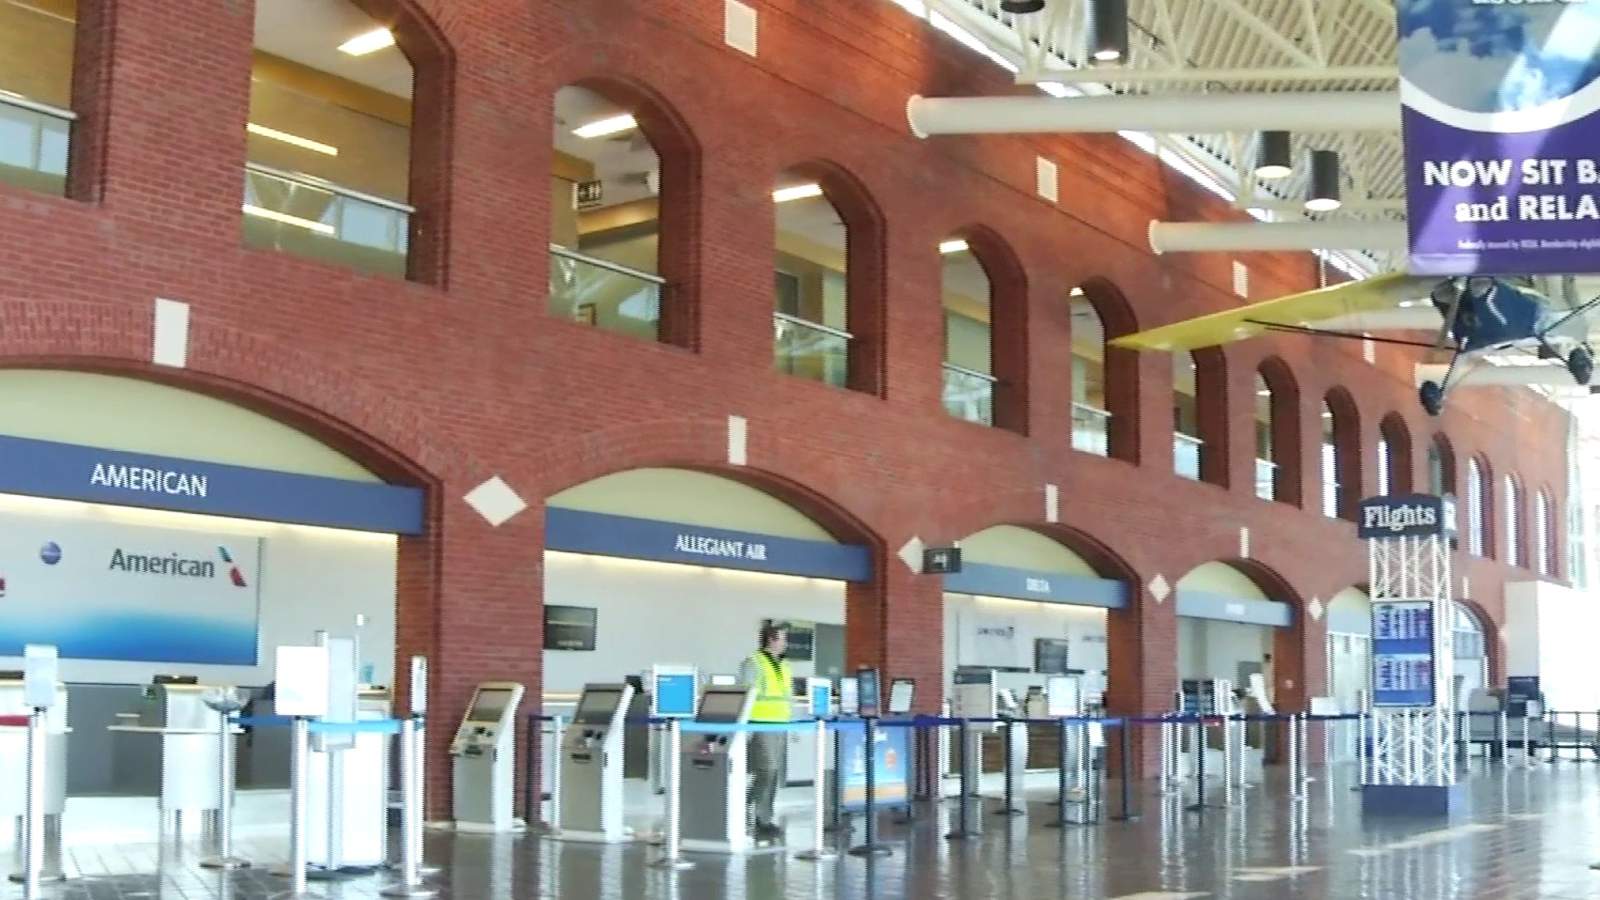 Roanoke airport has first flat month since April